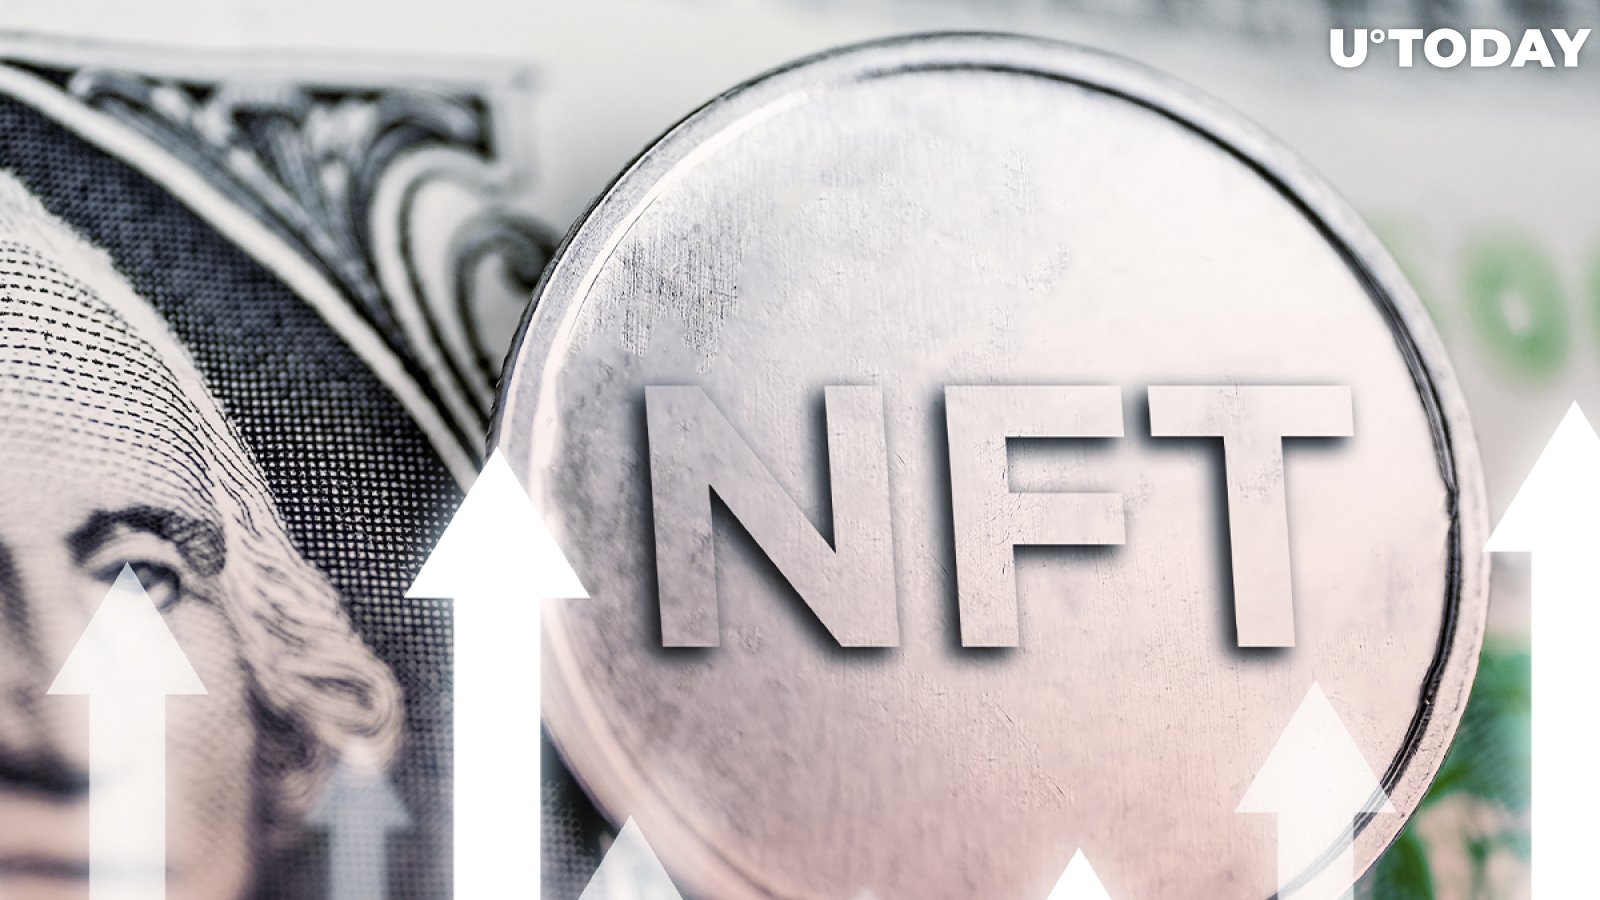 CryptoKitties, CryptoPunk and Others Booming with NFT Market Hitting $180 Million in Daily Volume